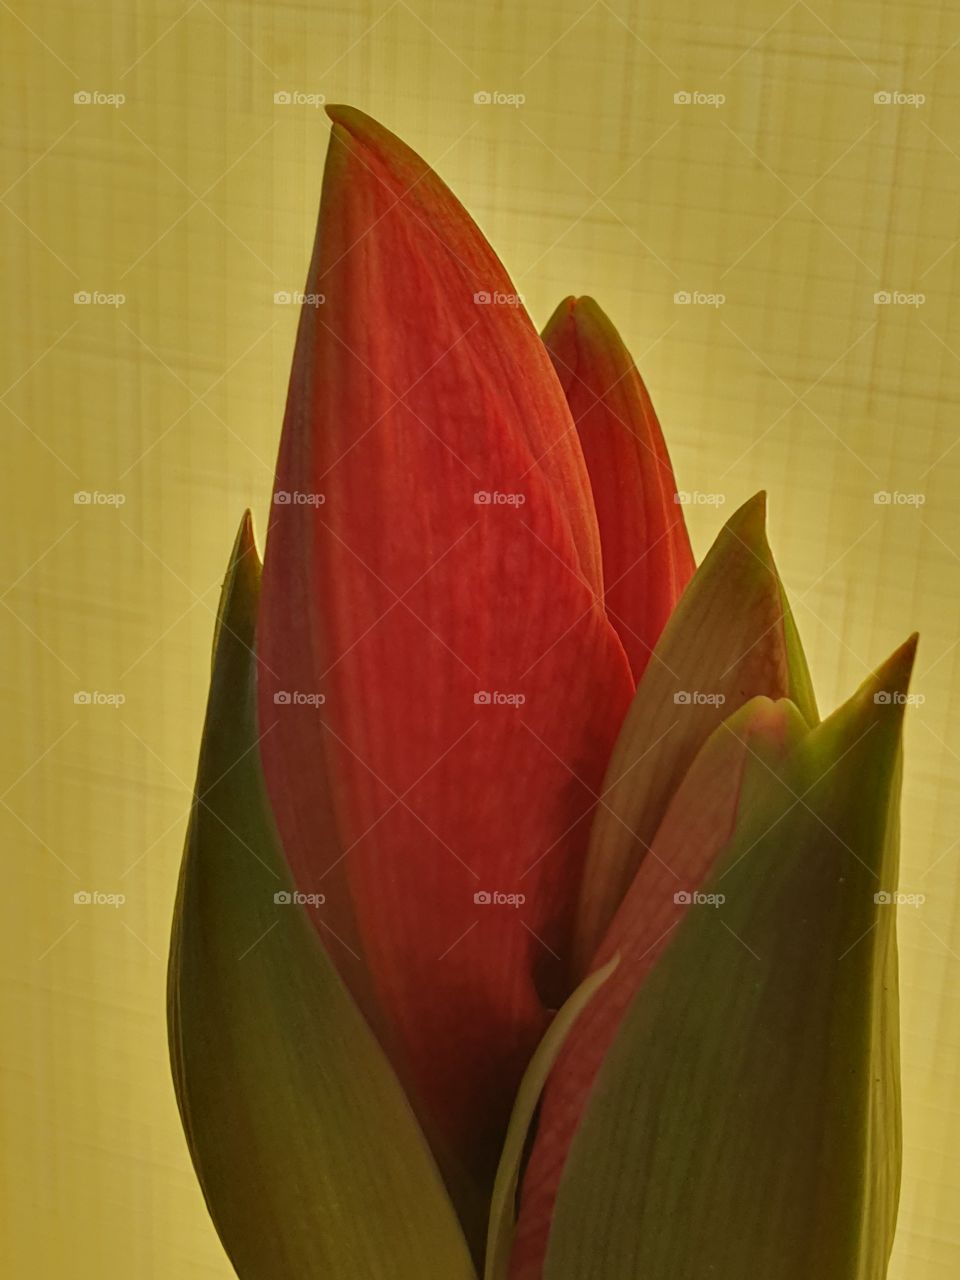 red flower bud in front of yellow curtain